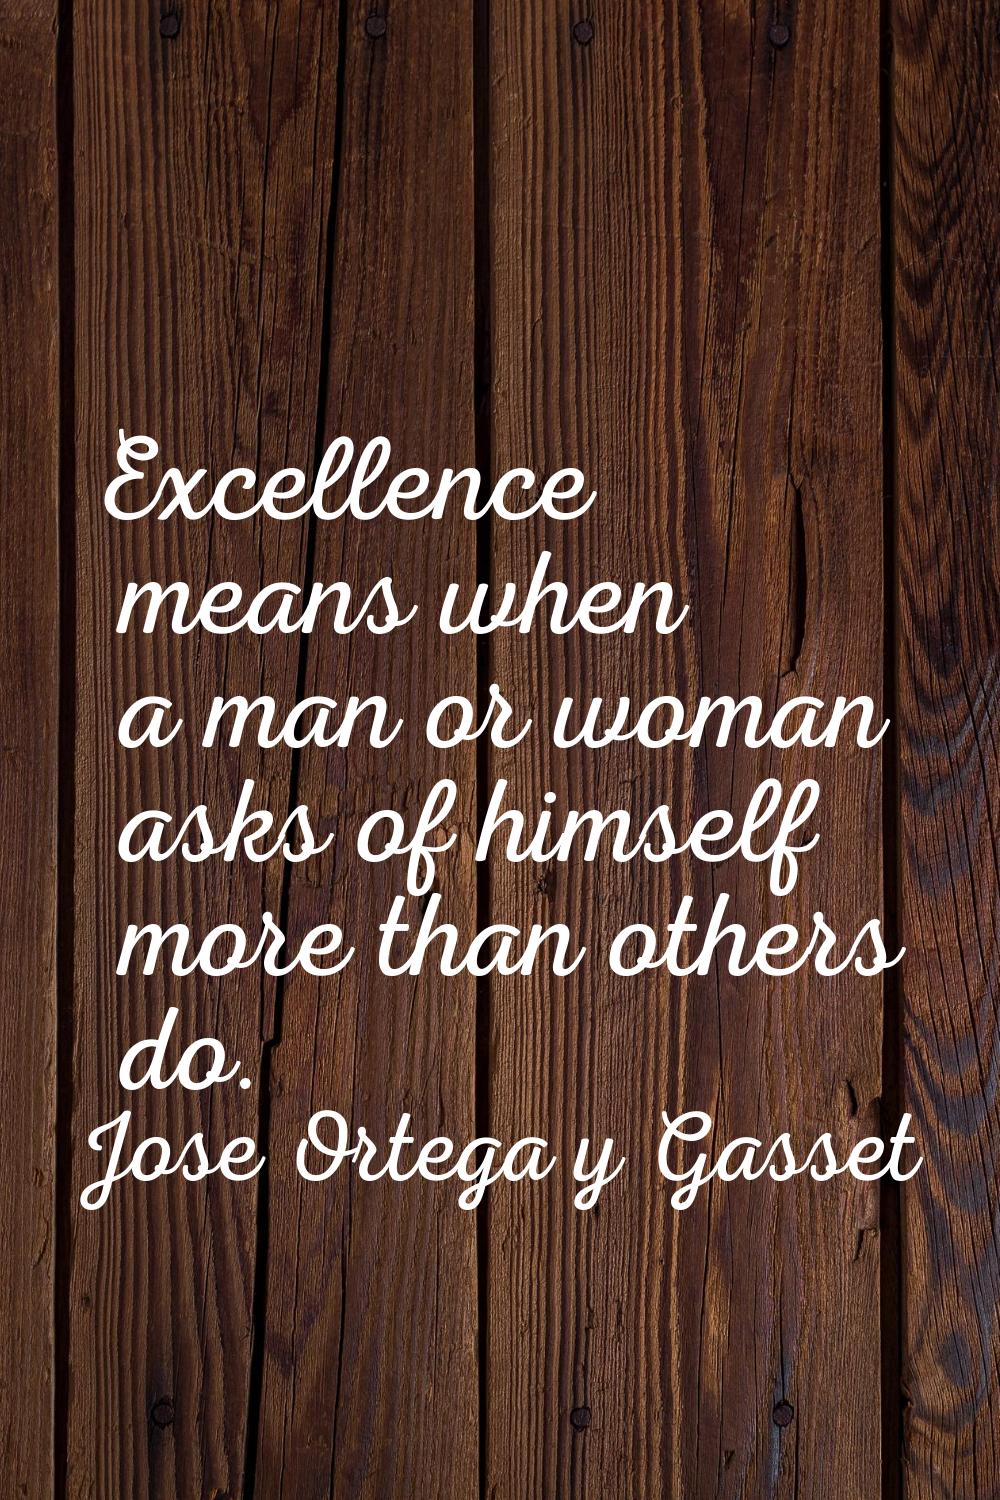 Excellence means when a man or woman asks of himself more than others do.